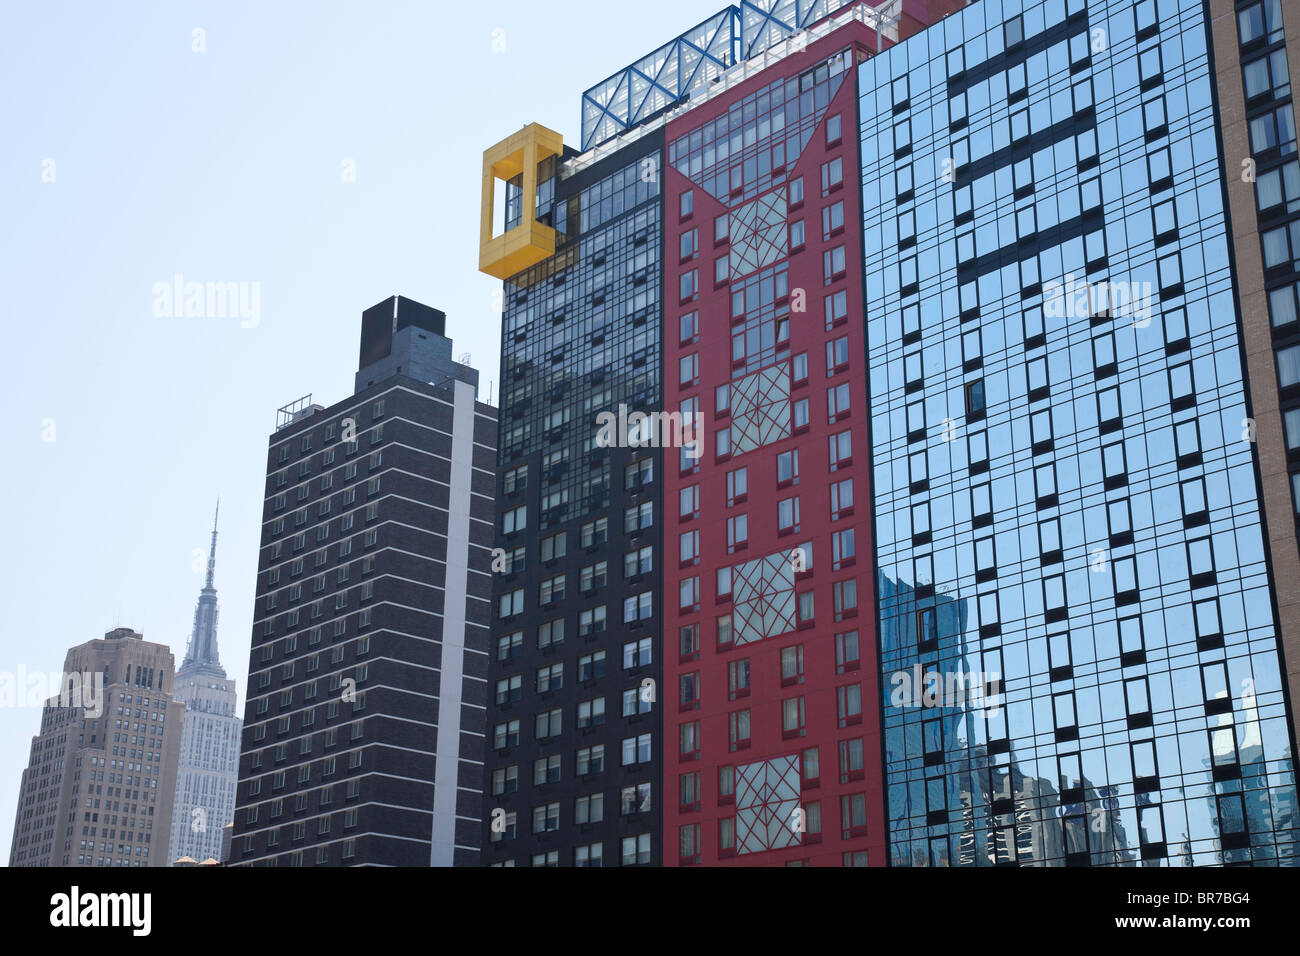 Staybridge Suites Extended Stay Hotel Times Square - New York City Stockfoto